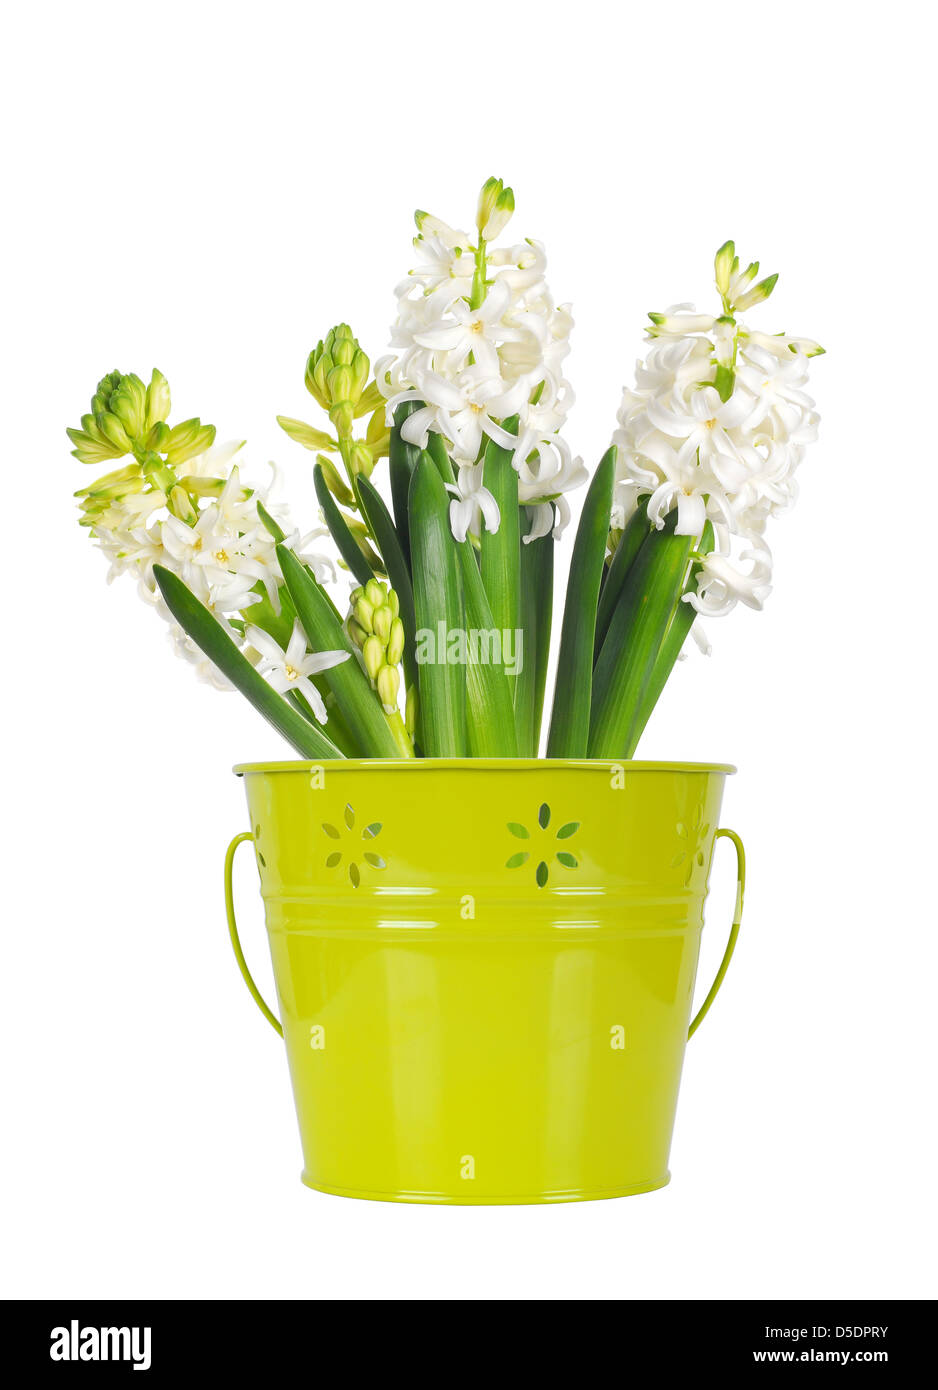 Beautiful white hyacinth flower in a green bucket, isolated on white background Stock Photo